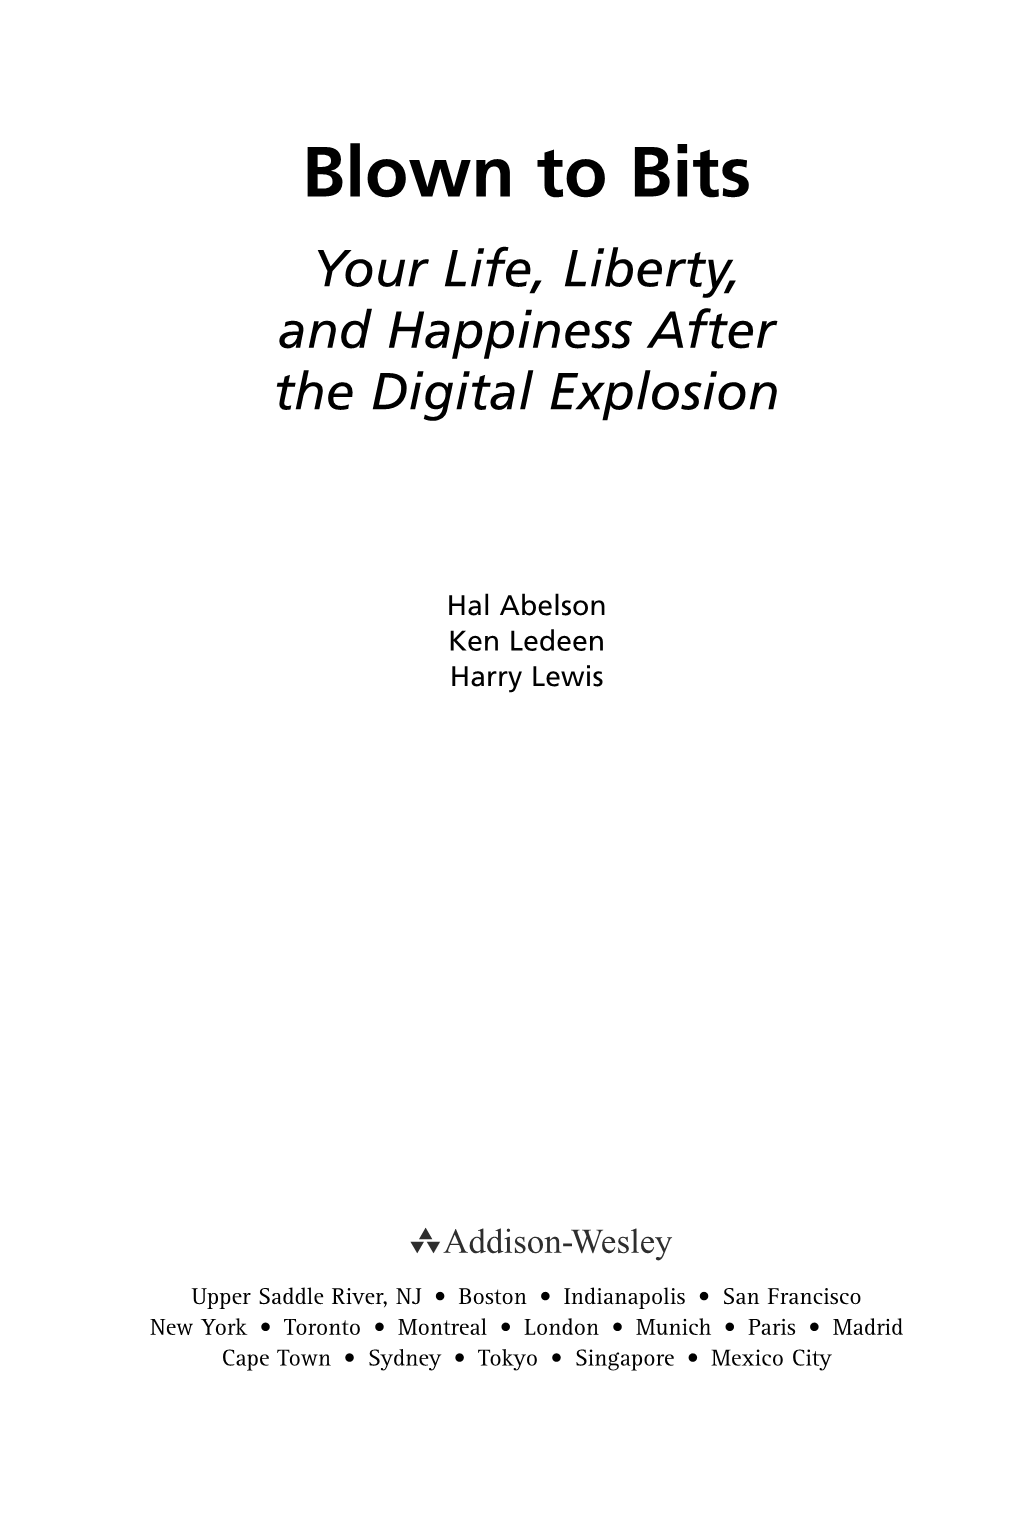 APPENDIX the Internet As System and Spirit